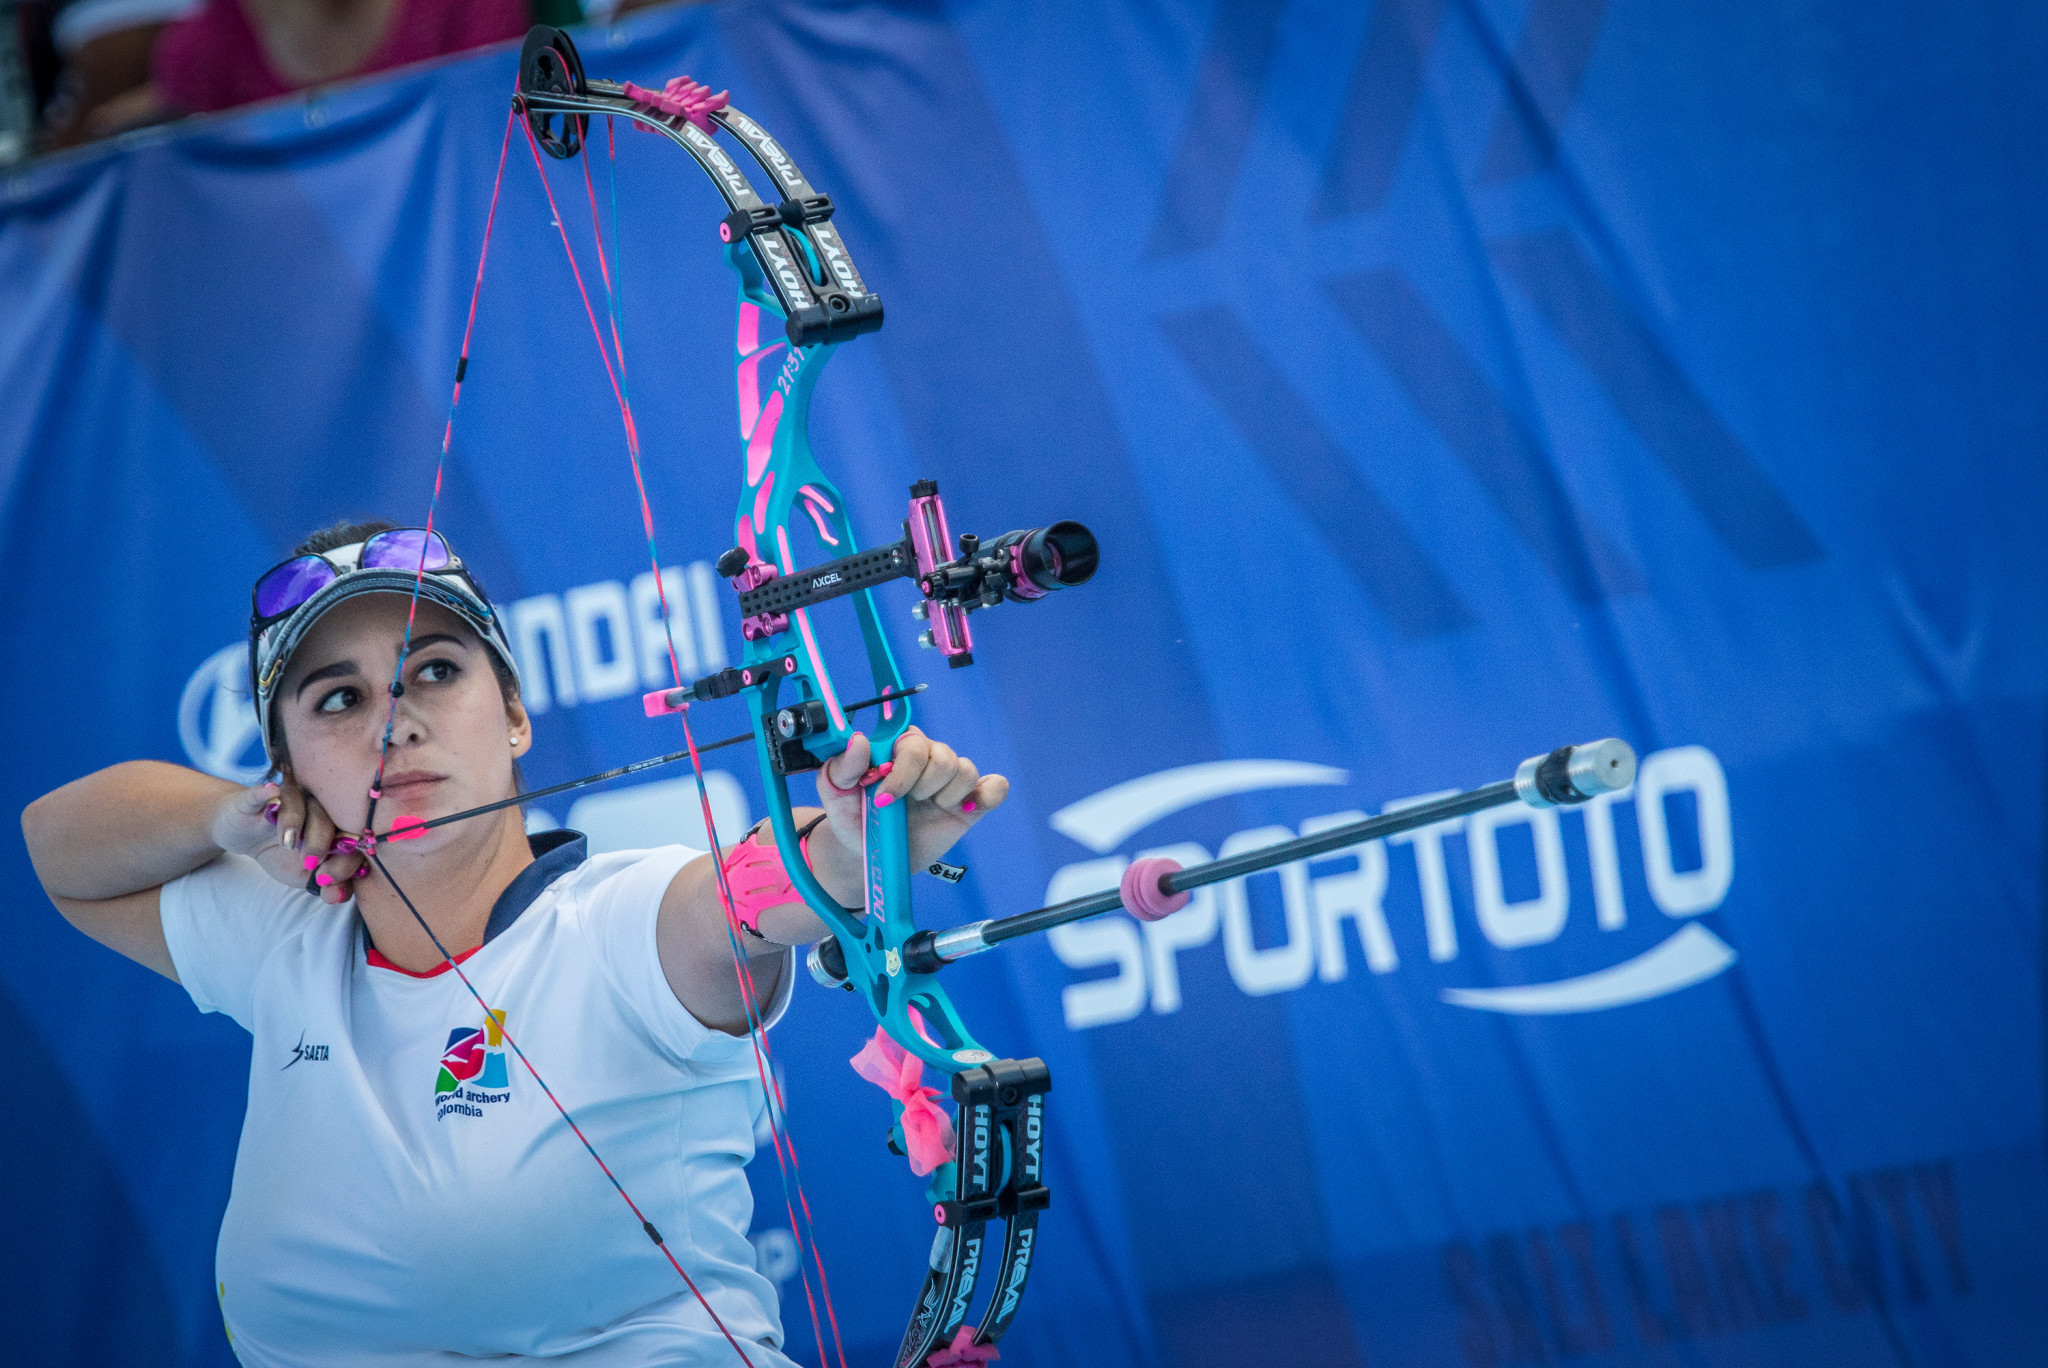 World number two Sara Lopez is among the headline names due to compete in Medellin ©World Archery